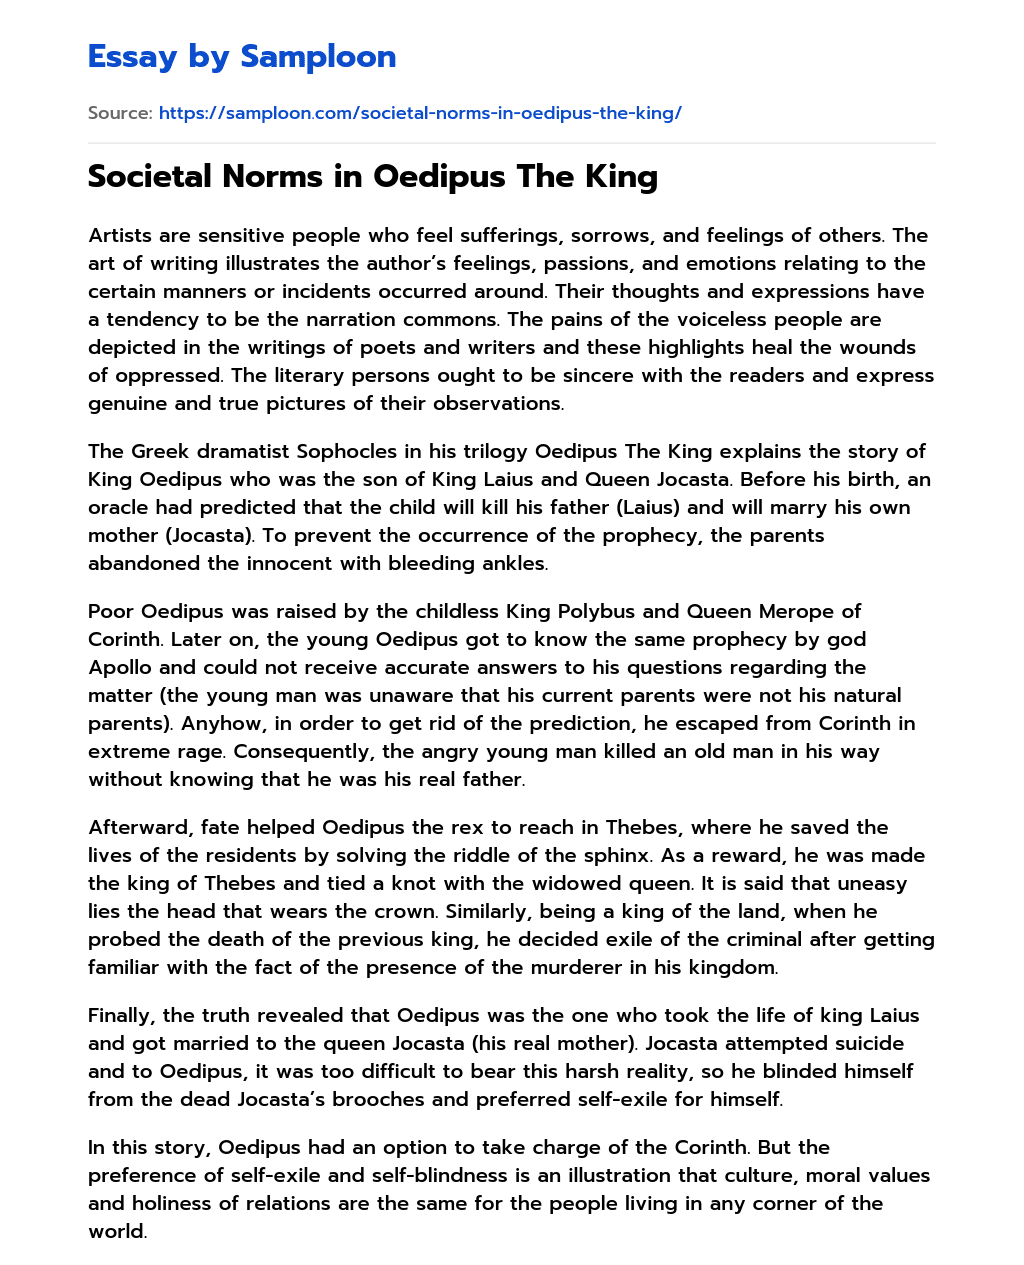 Societal Norms in Oedipus The King essay